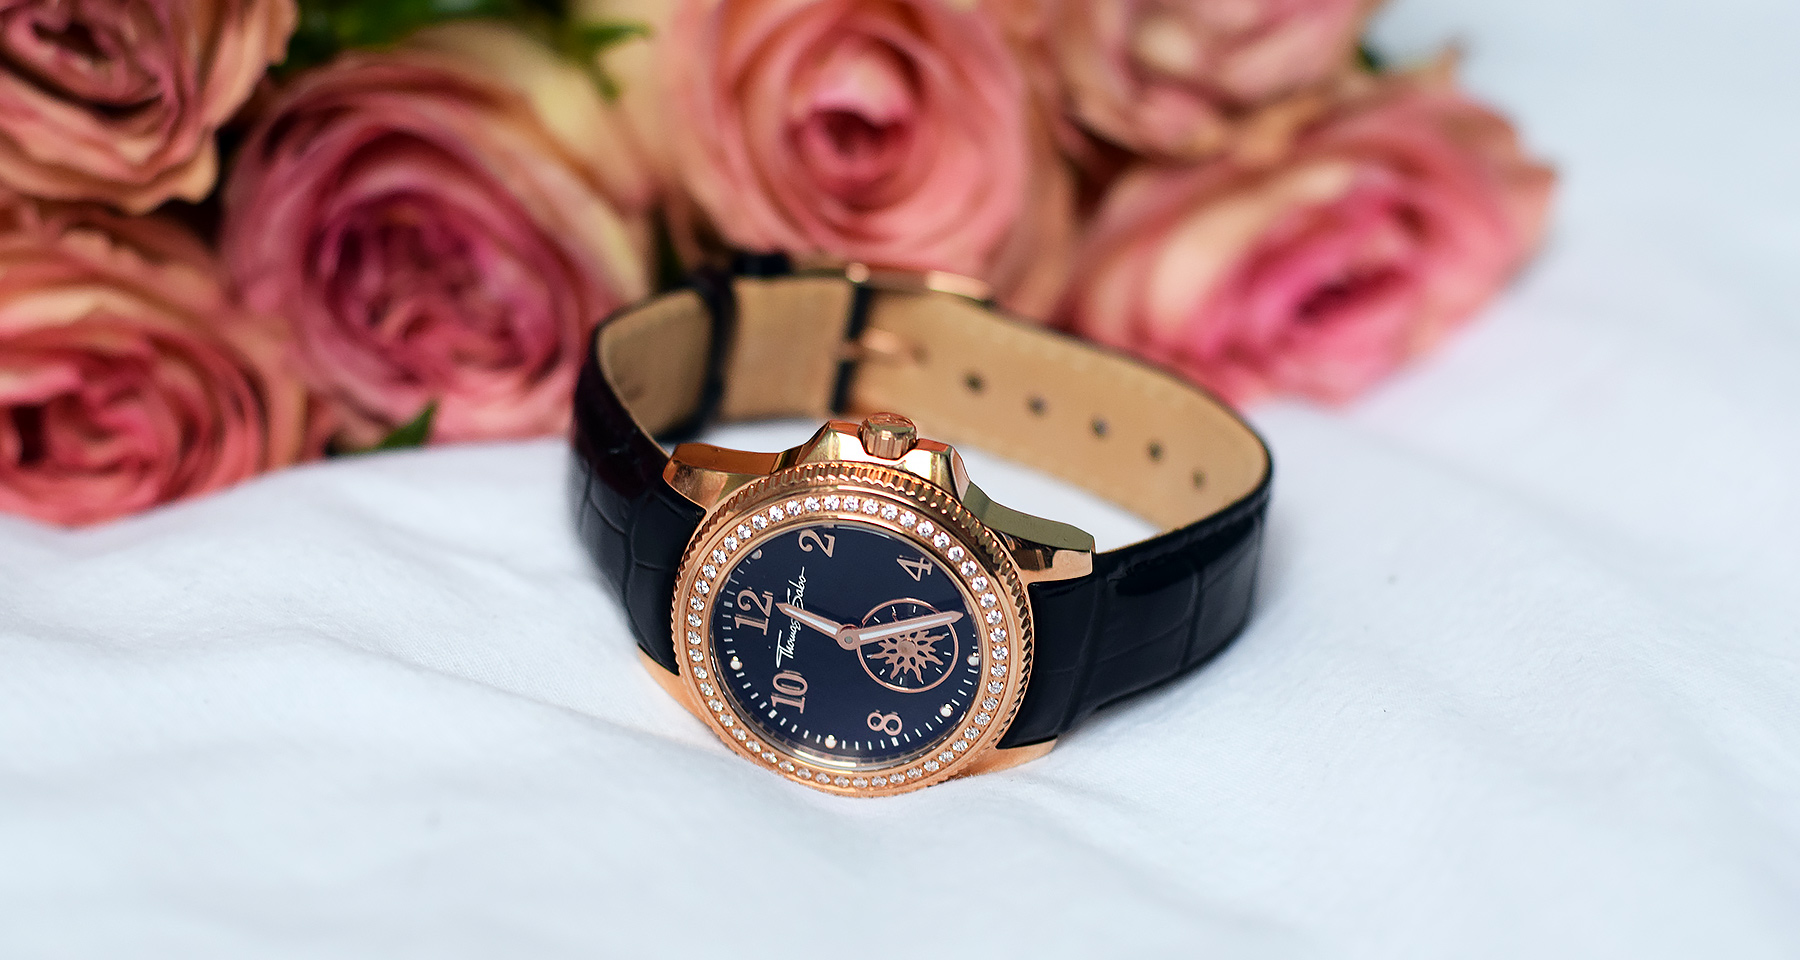 Thomas sabo crystal embellished rose gold watch with sun dial